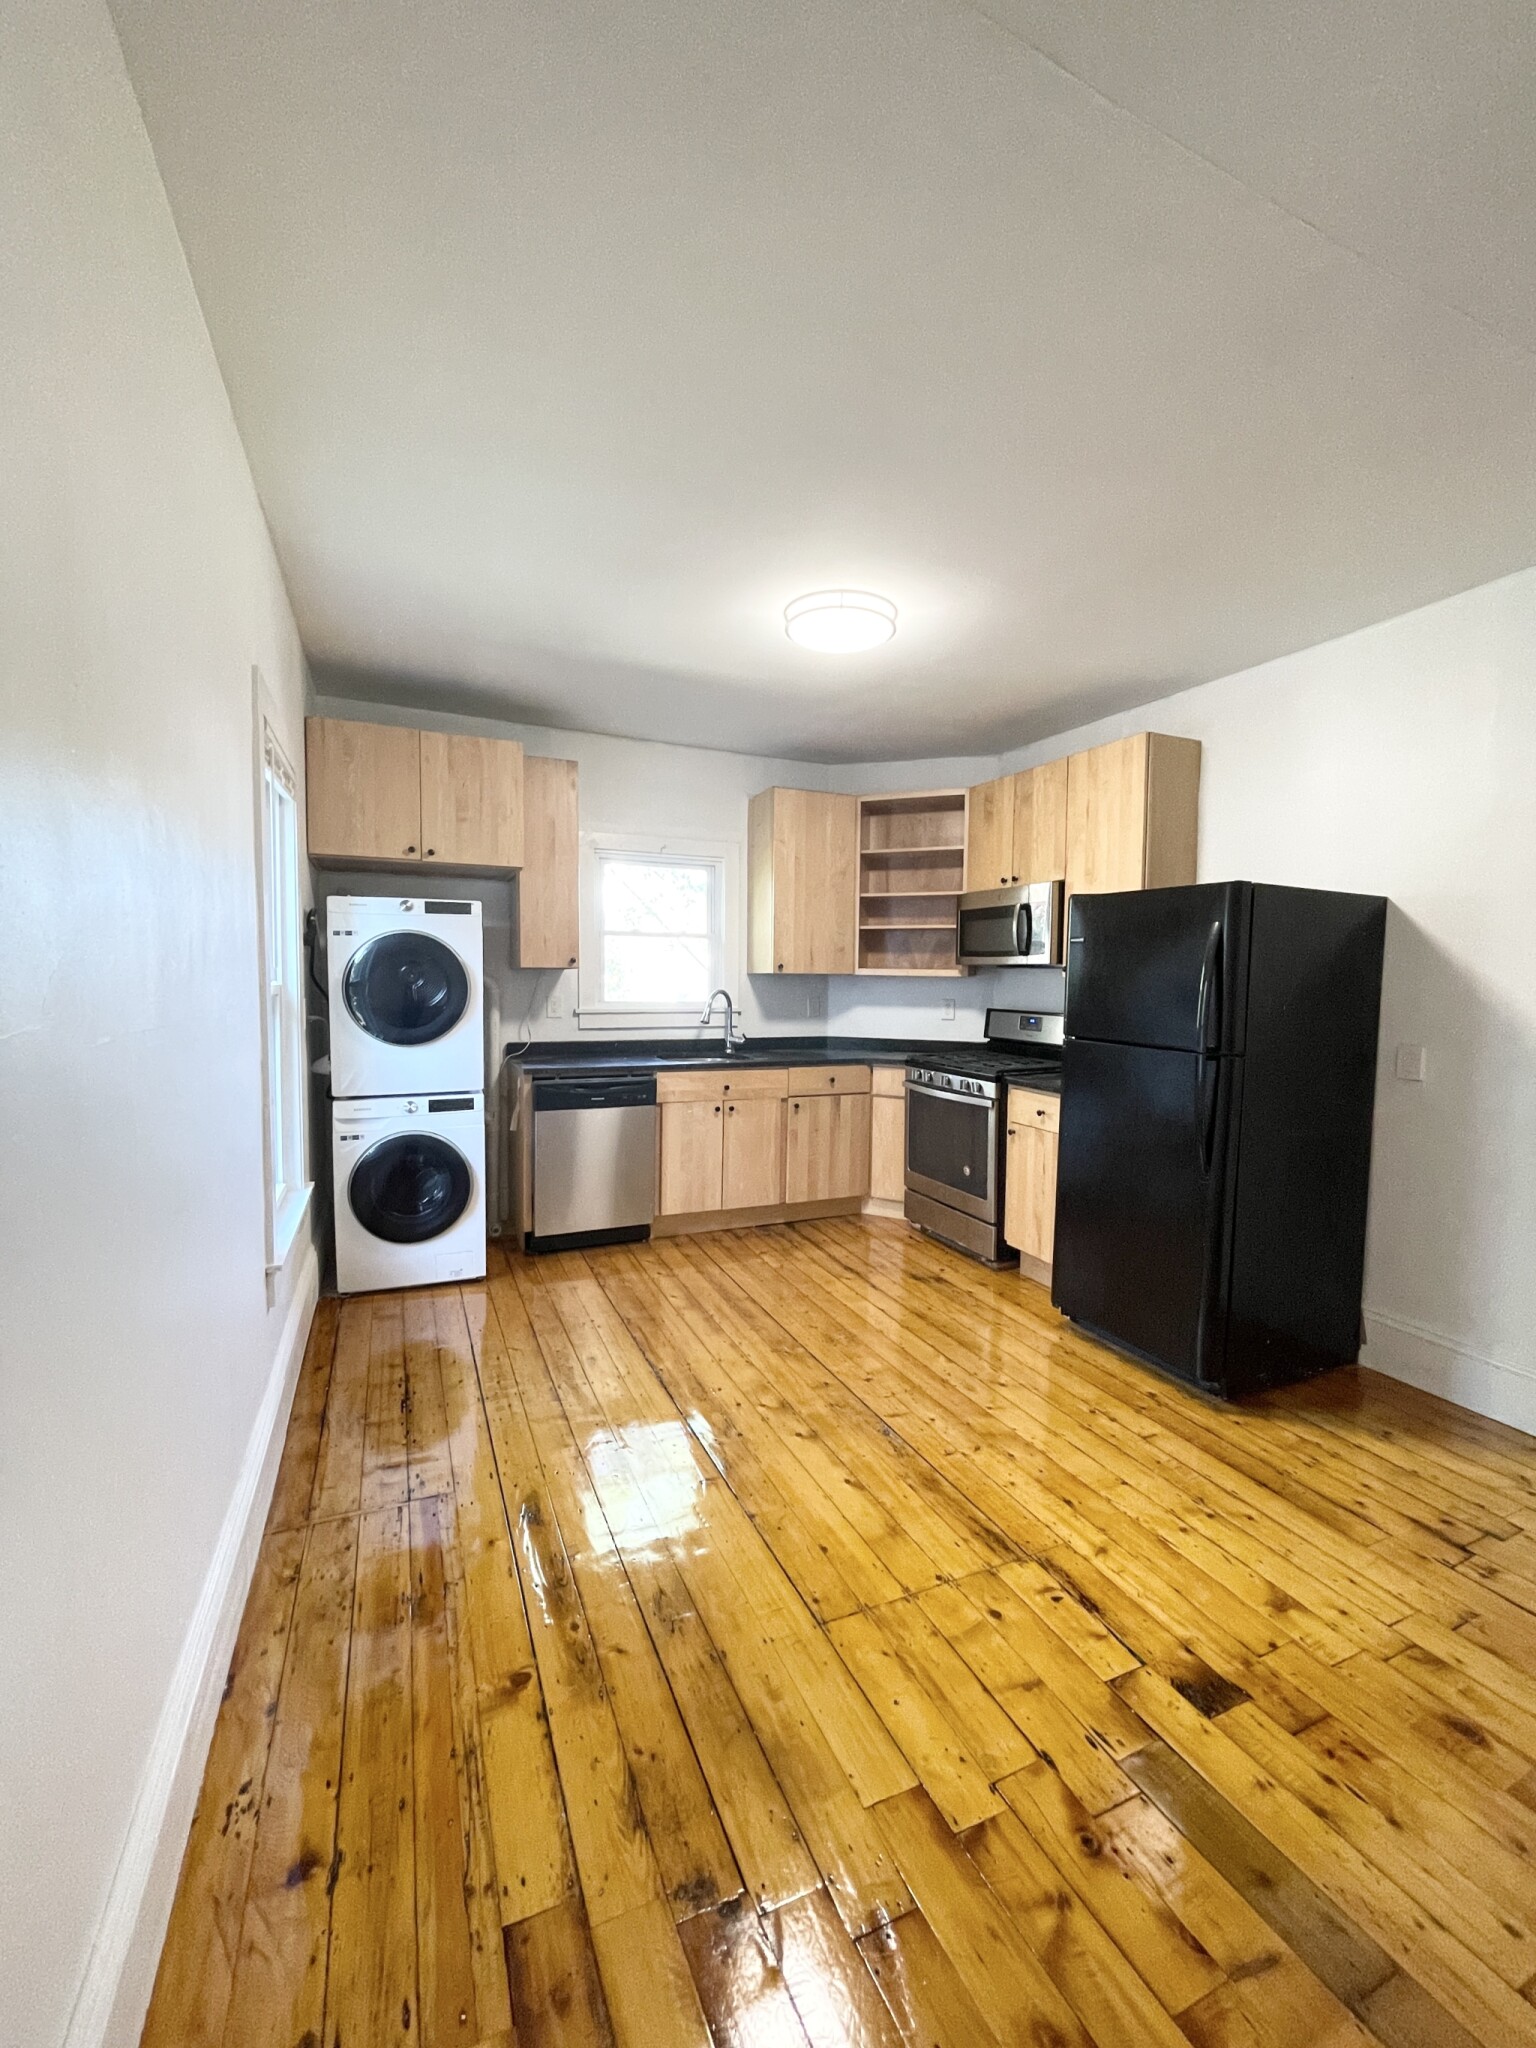 Photos of apartment on Marion St.,Somerville MA 02143